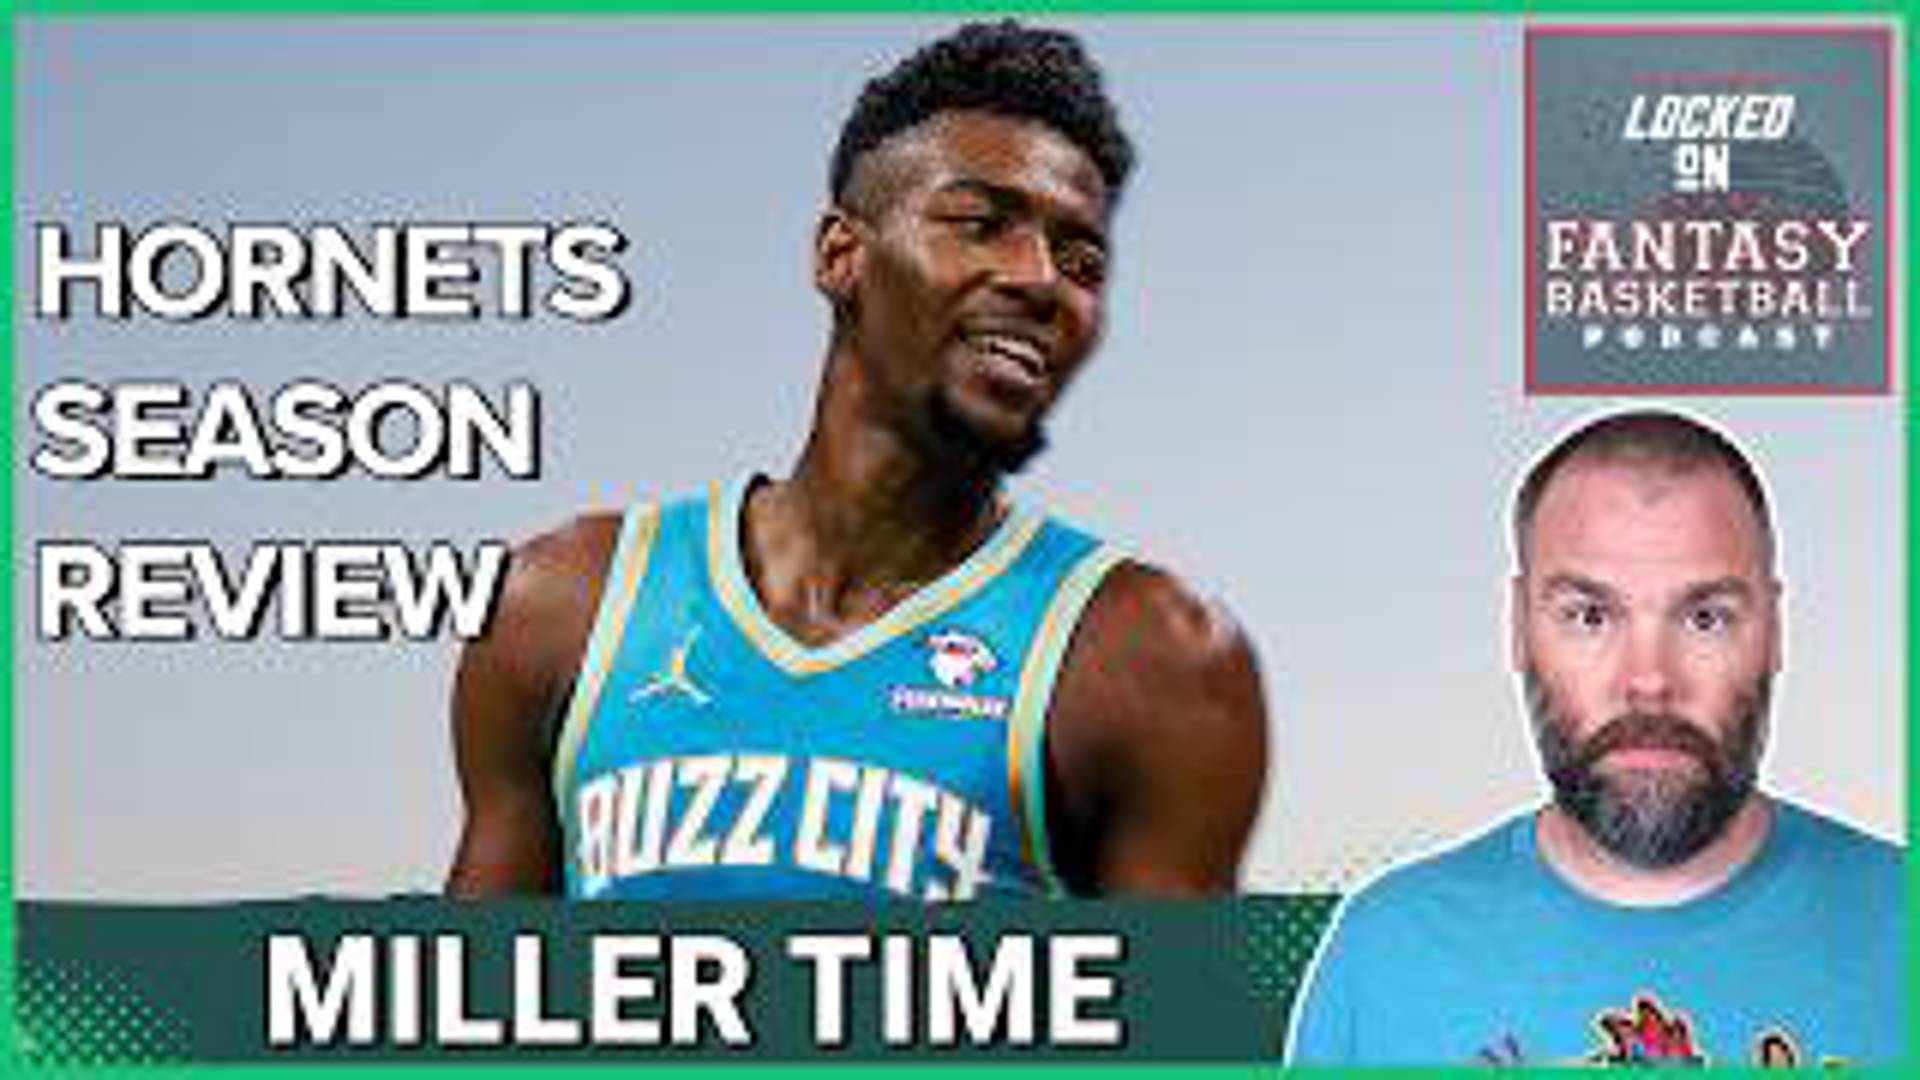 Join Josh Lloyd for an in-depth review of the Charlotte Hornets' season, examining key moments and player trajectories.